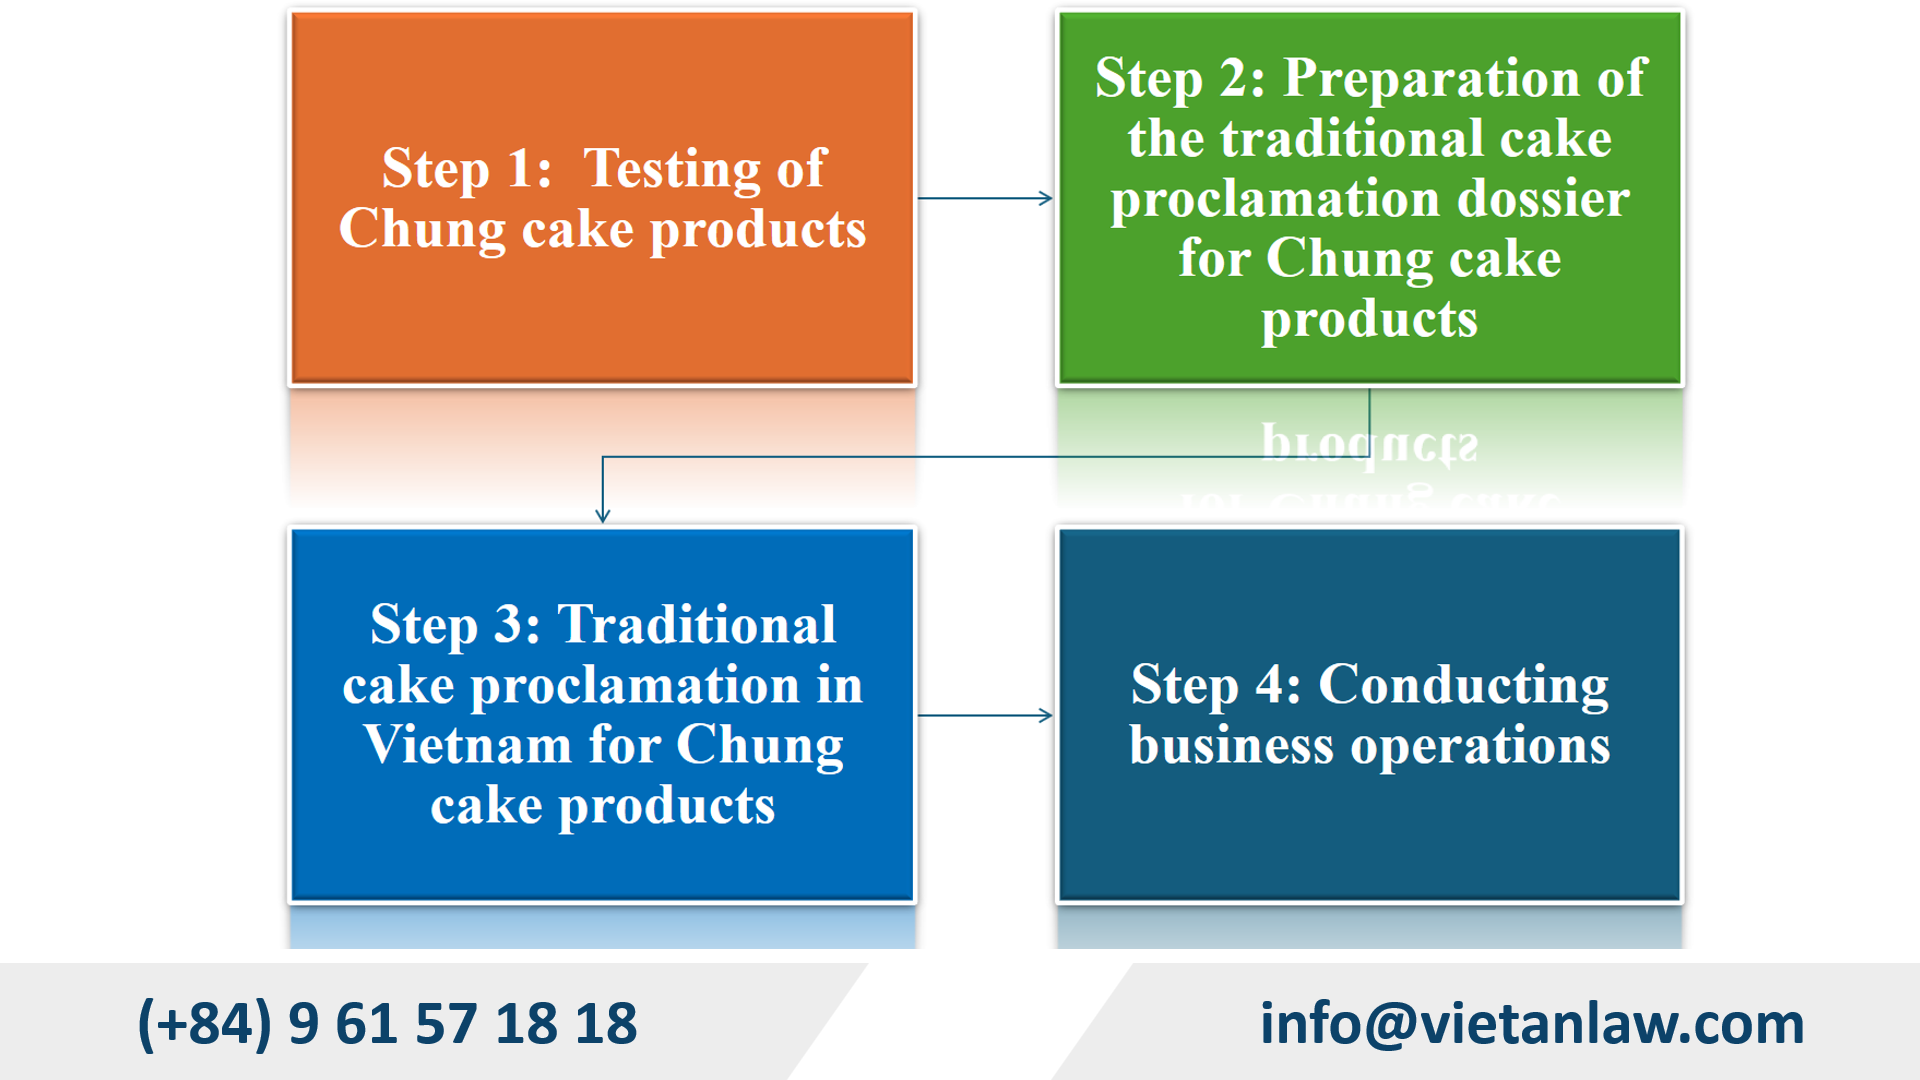 Procedure for traditional cake proclamation in Vietnam